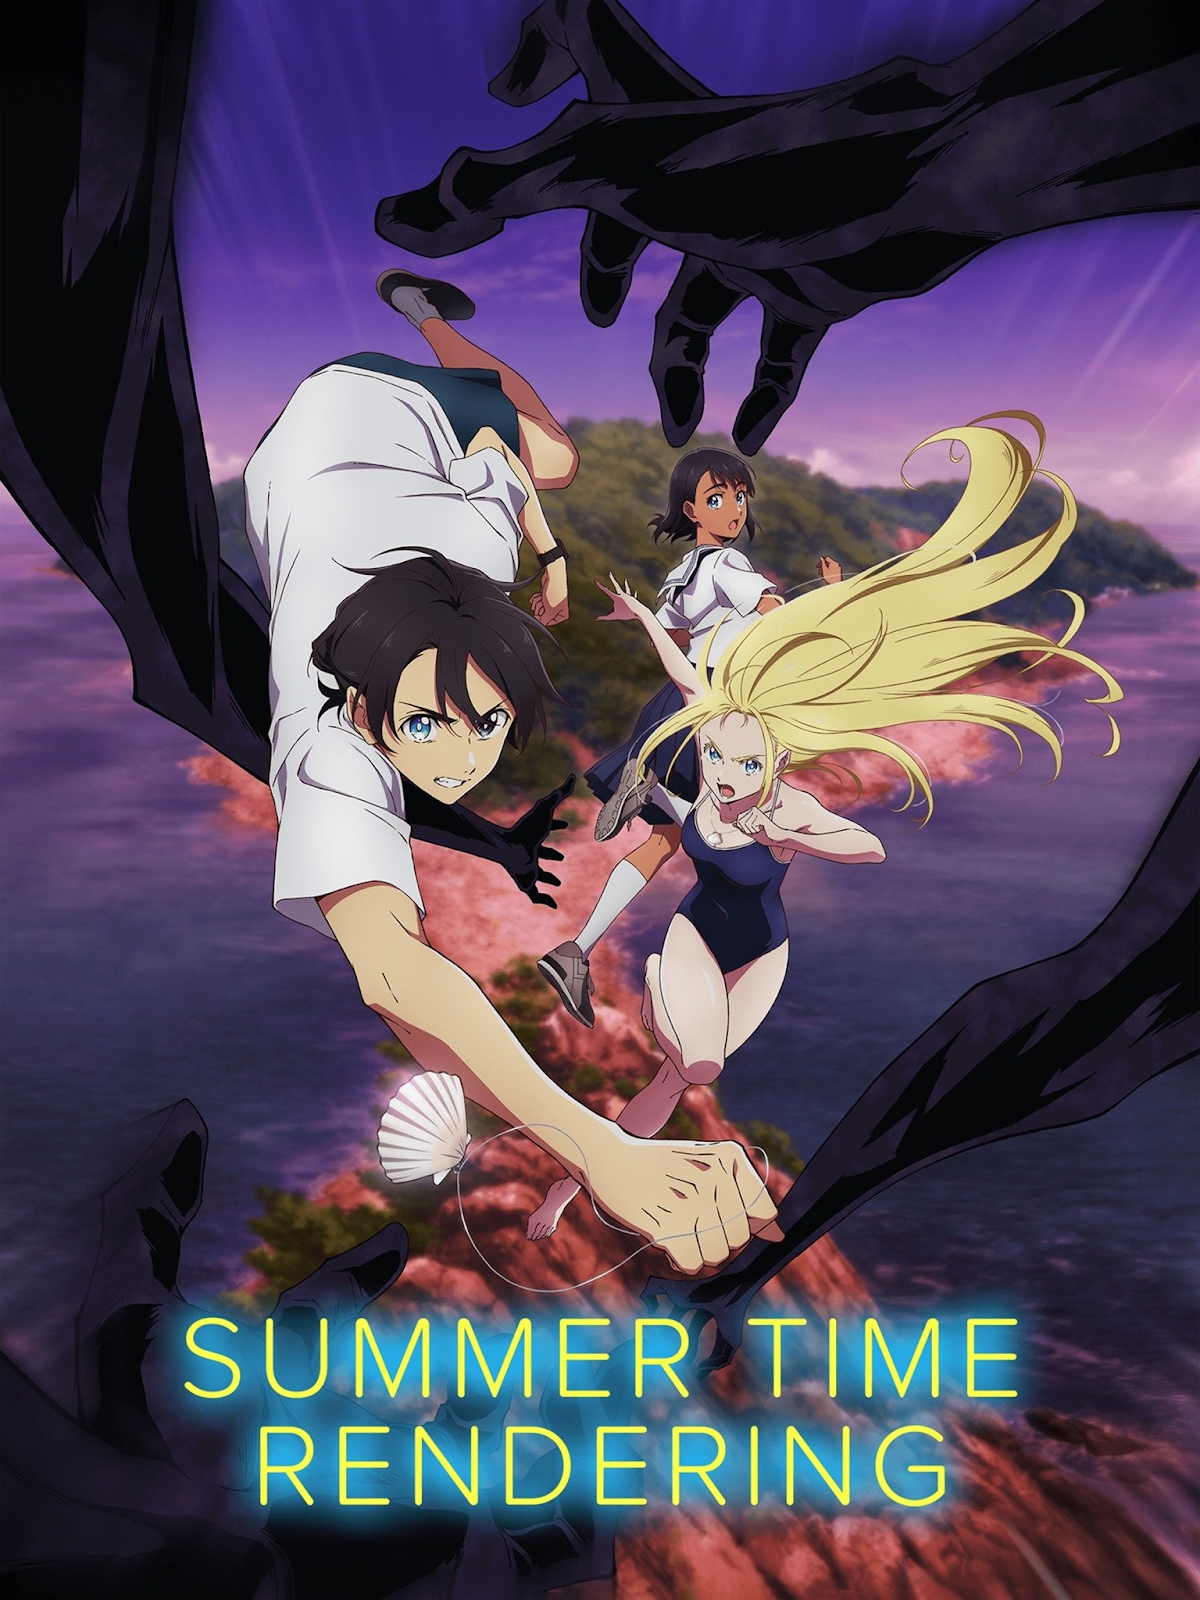 Summertime Render does mystery, thriller, and time travel right